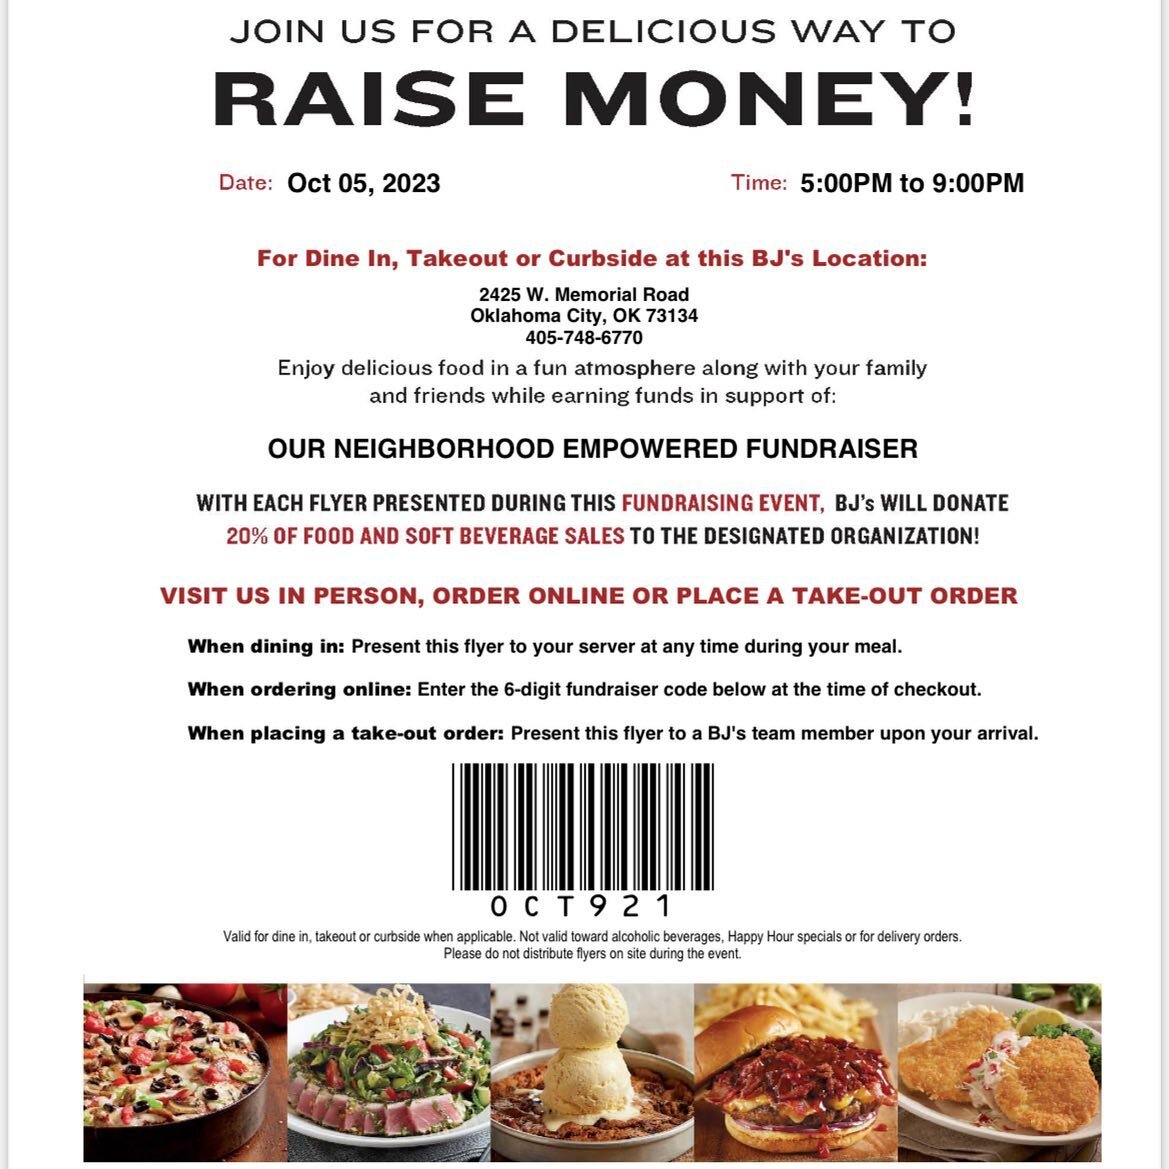 Friends!!! Come have dinner with us on October 5th at BJs! 20% of their sales will be donated to us when you show this flyer during dinner time that evening (5p-9p). We&rsquo;d love to see you there!! Mark your calendars now!